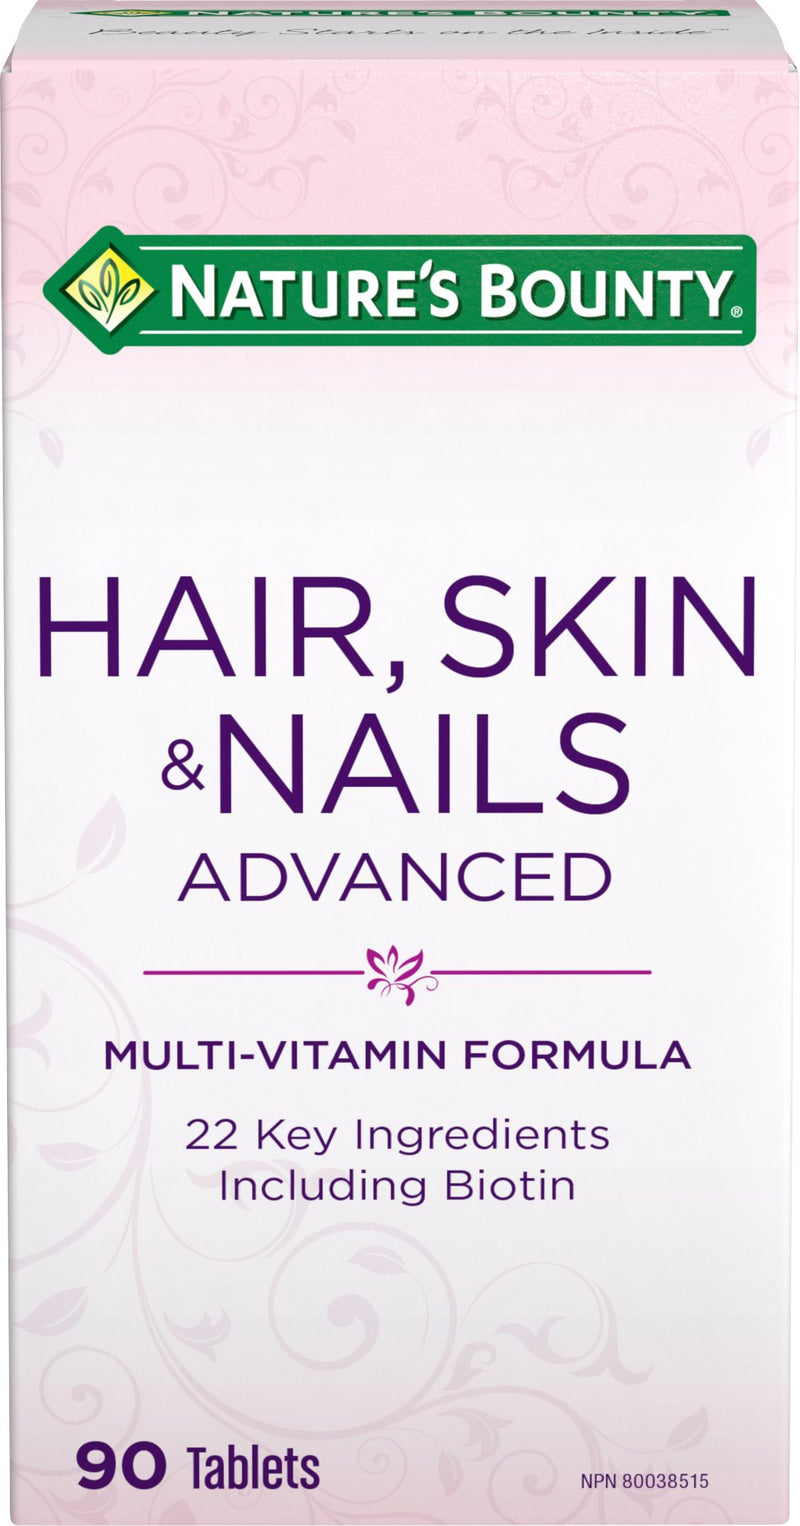 Nature's Bounty Hair, Skin & Nails Advanced Tablets